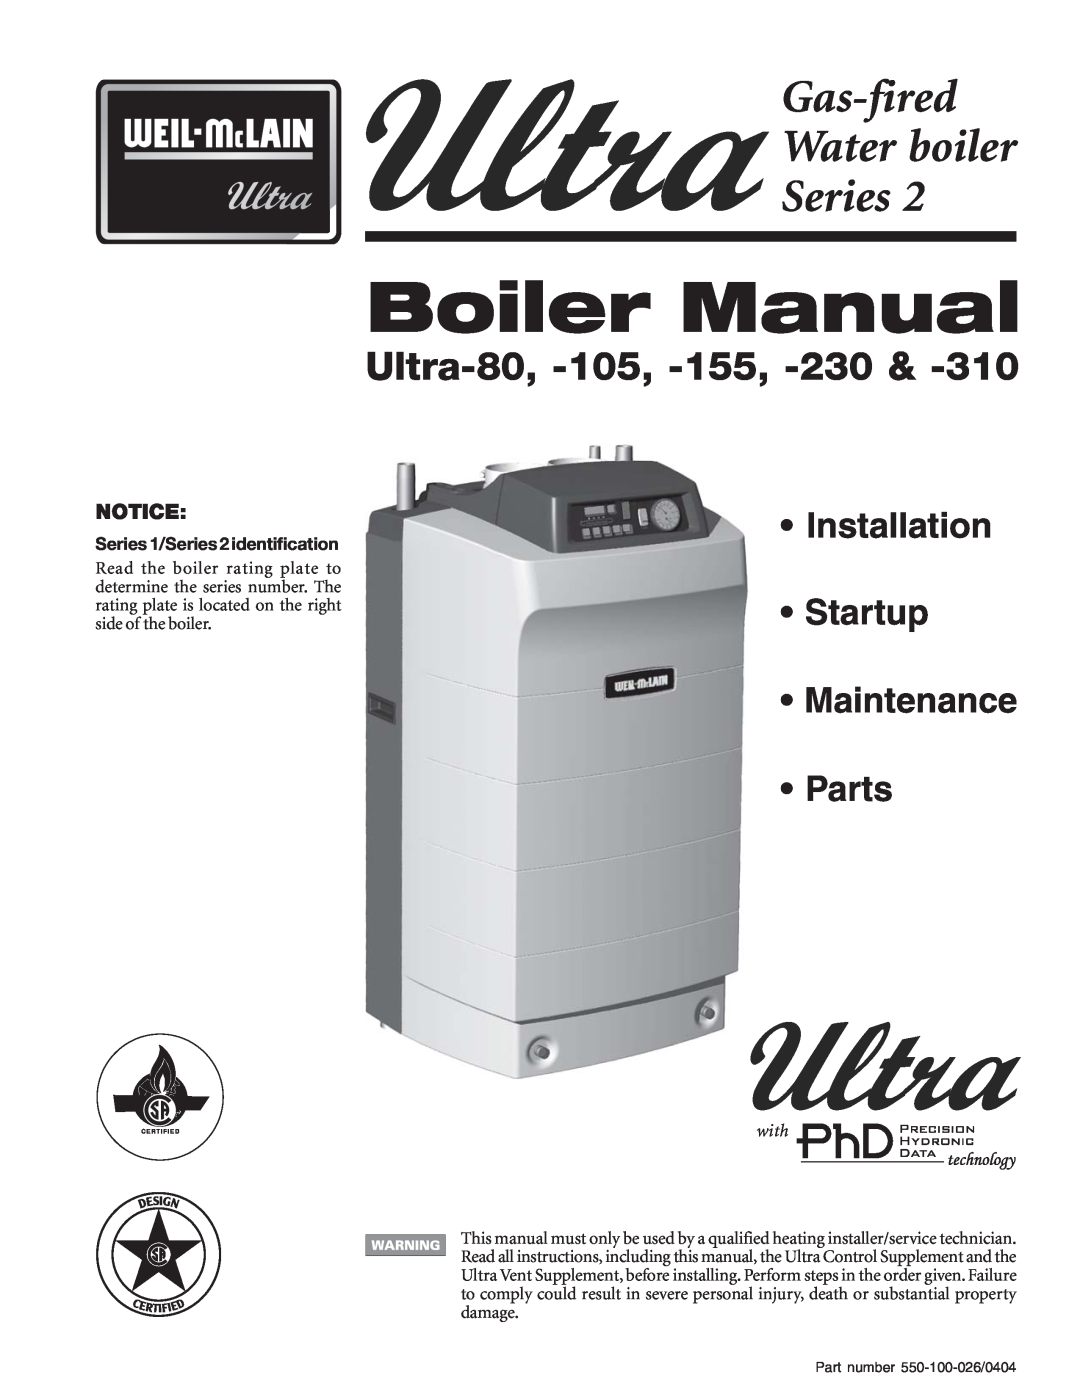 Ultra electronic 105, 155 manual Gas-fired Water boiler Series, Ultra-80, Installation Startup Maintenance Parts, with 